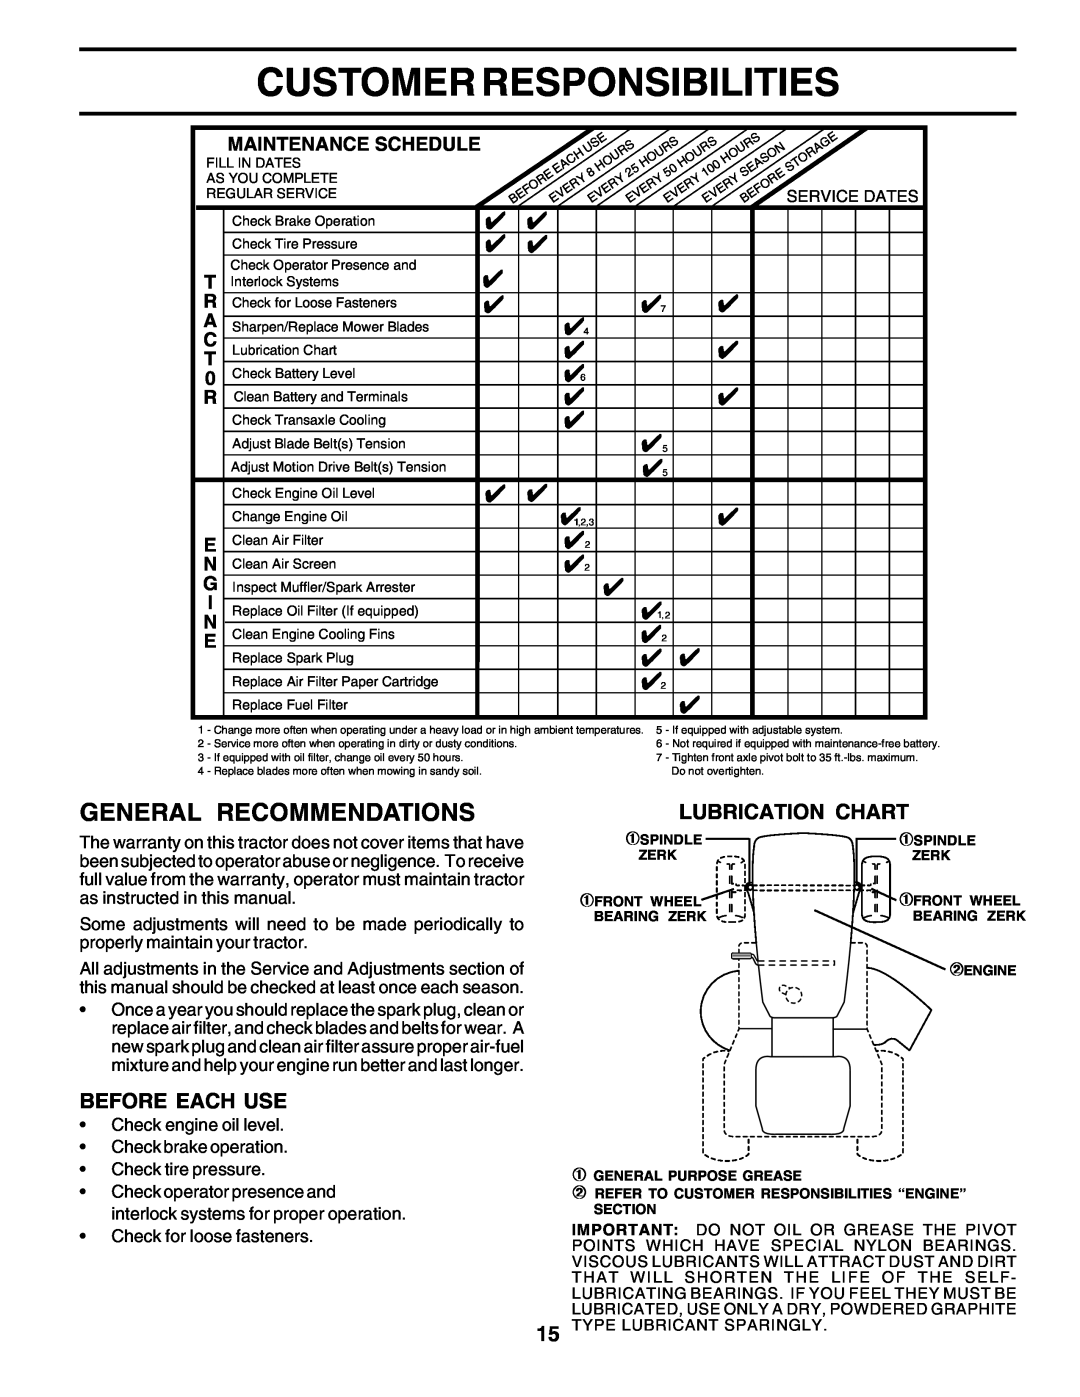 Weed Eater S165H42D owner manual Customer Responsibilities, General Recommendations, Before Each Use, Maintenance Schedule 